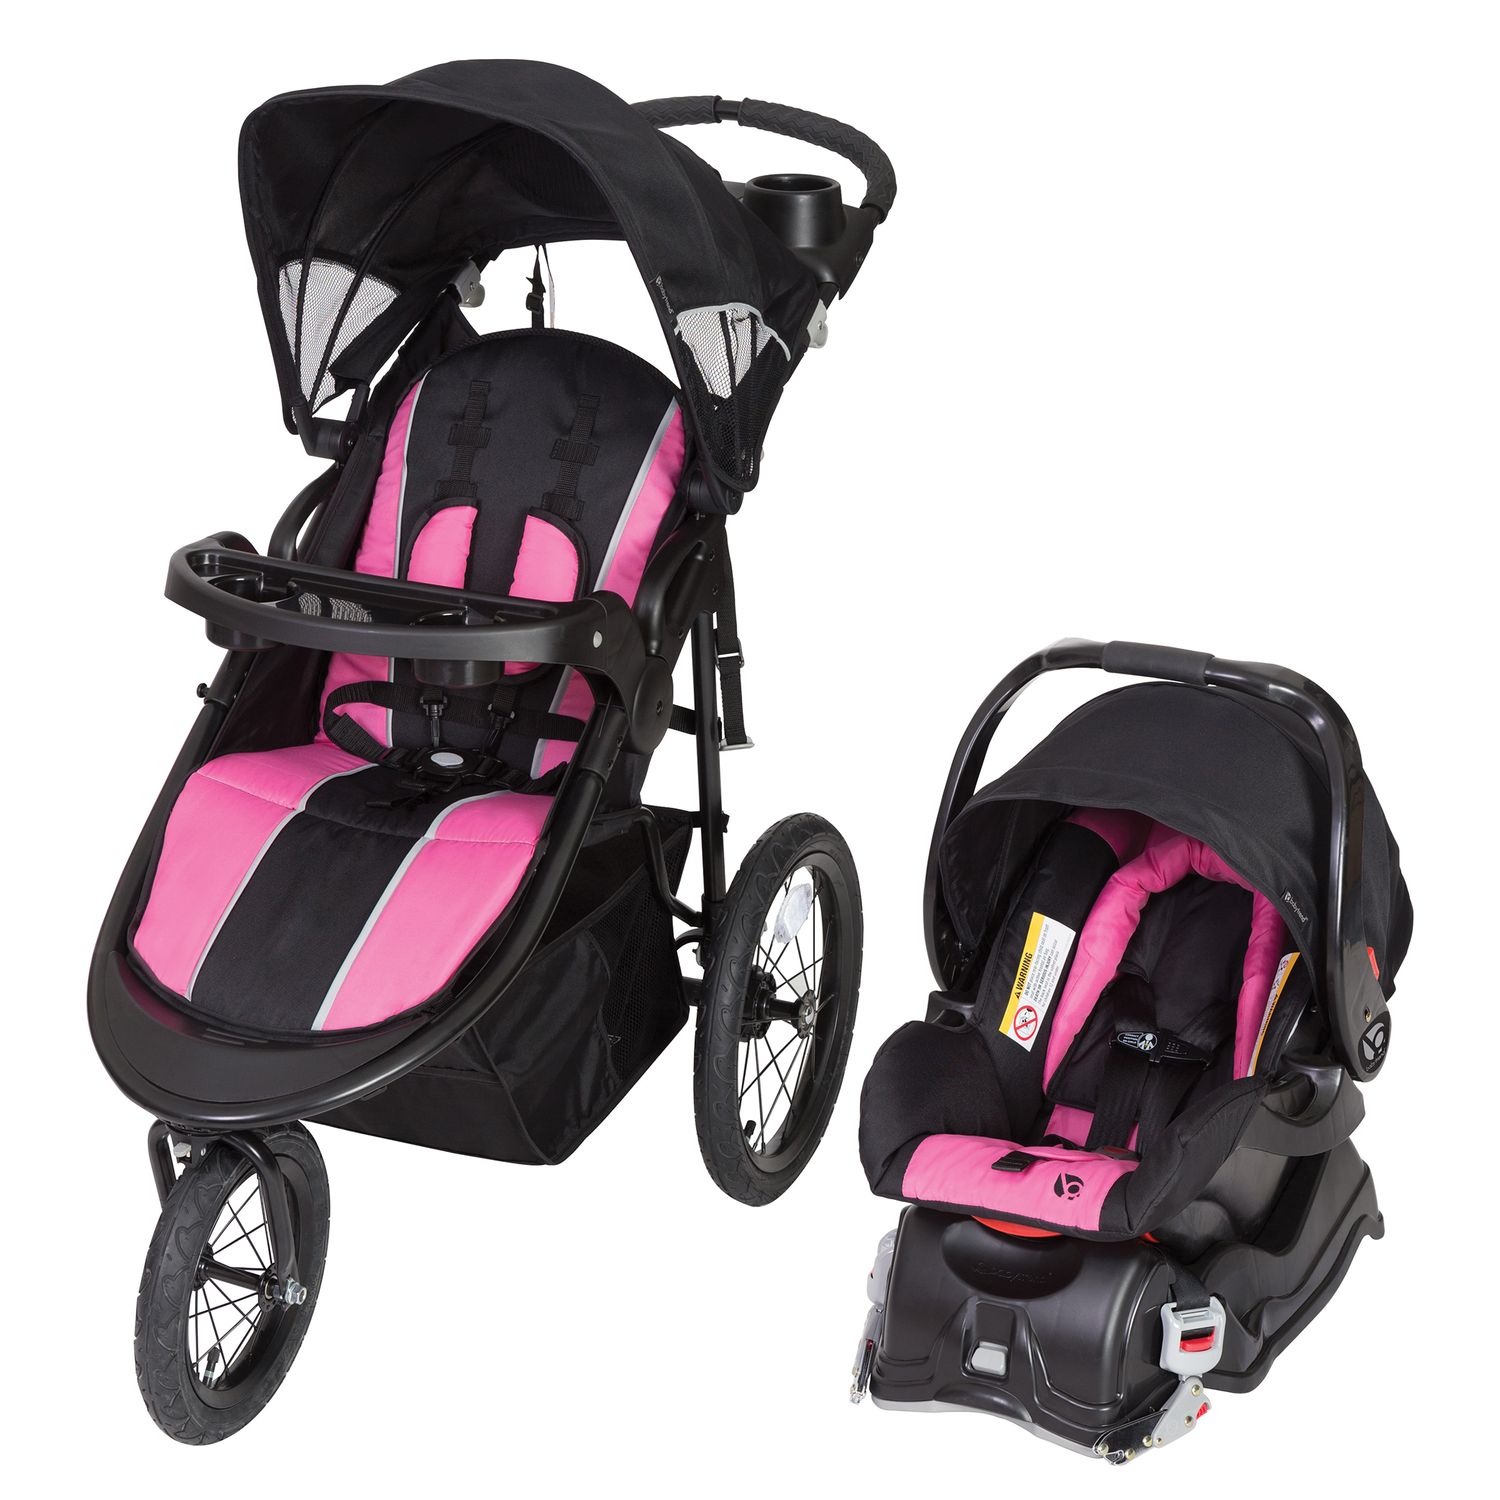 baby trend ez ride 5 travel system hello kitty expressions